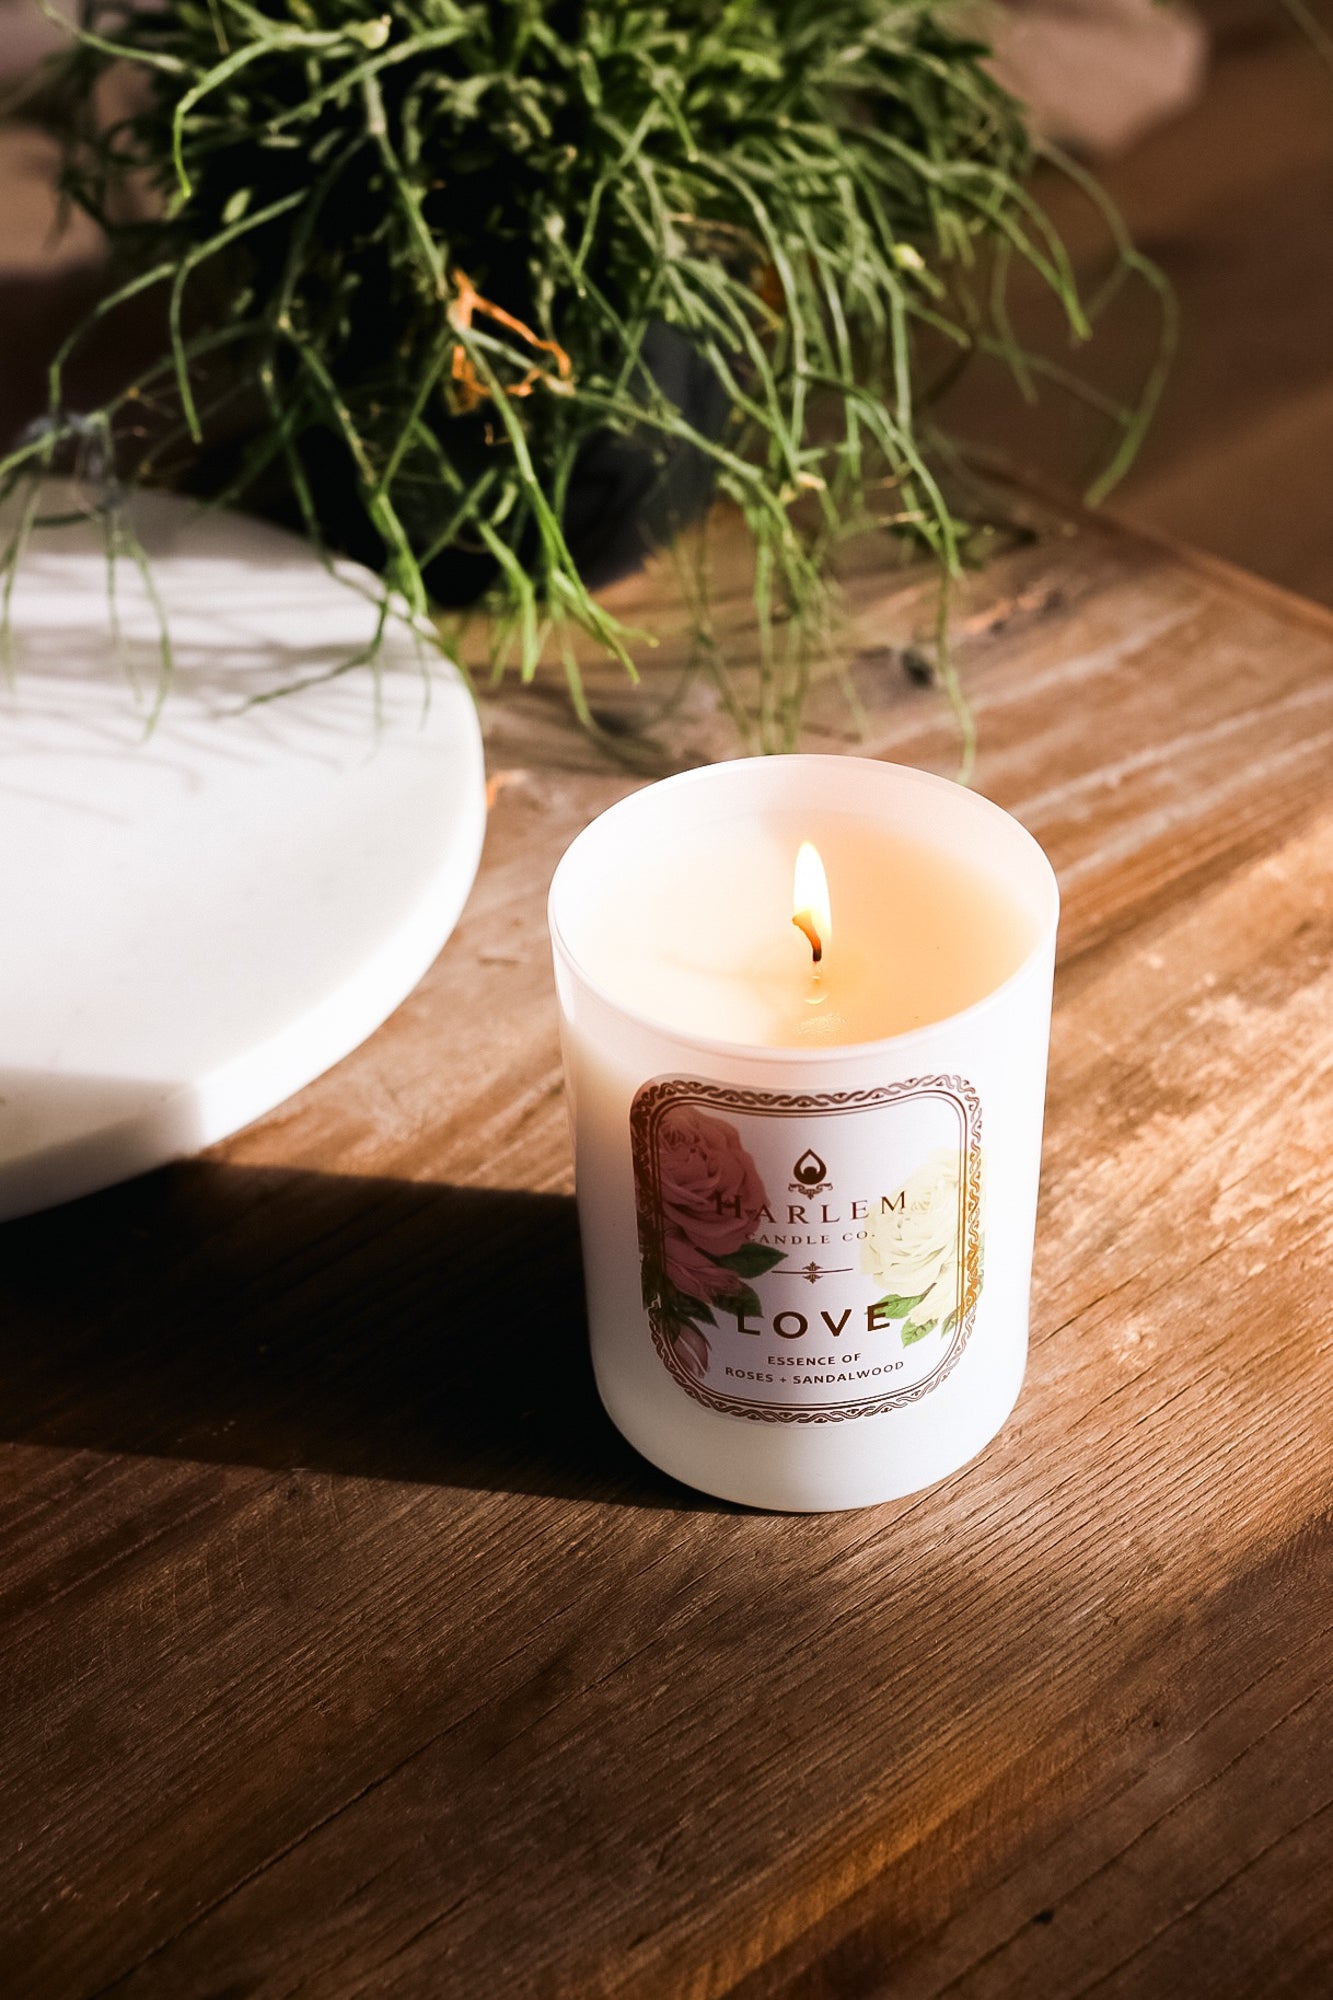 This is a vertical image of the "Love" Luxury Candle on a wooden table with greenery in the foreground.